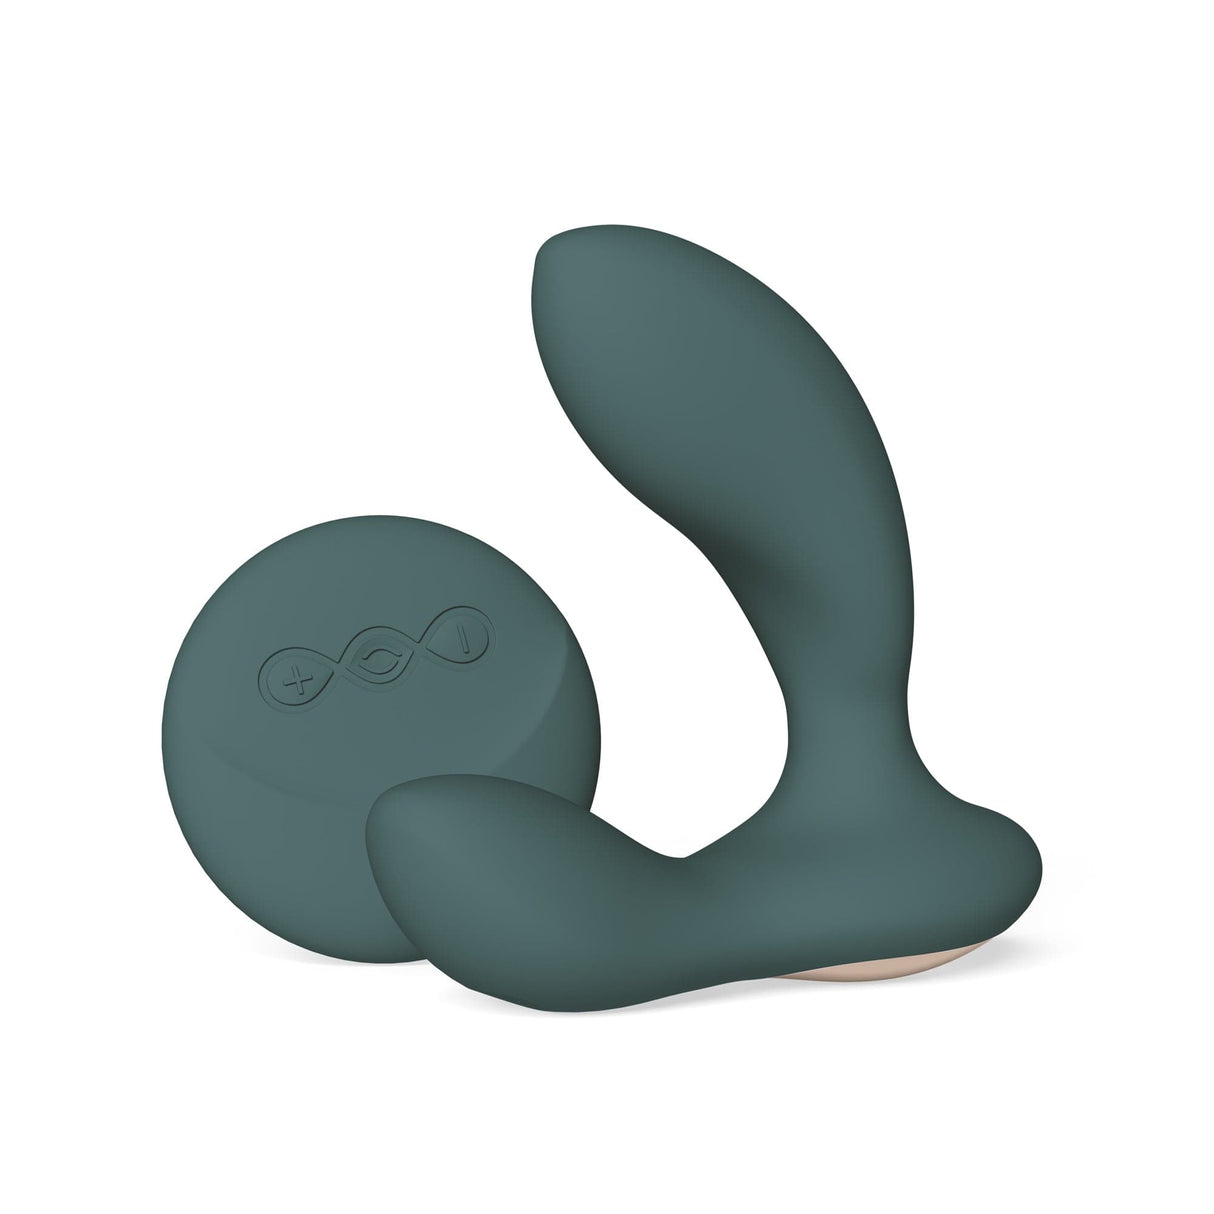 LELO - Hugo 2 Prostate Massager with Remote Control LL1237 CherryAffairs